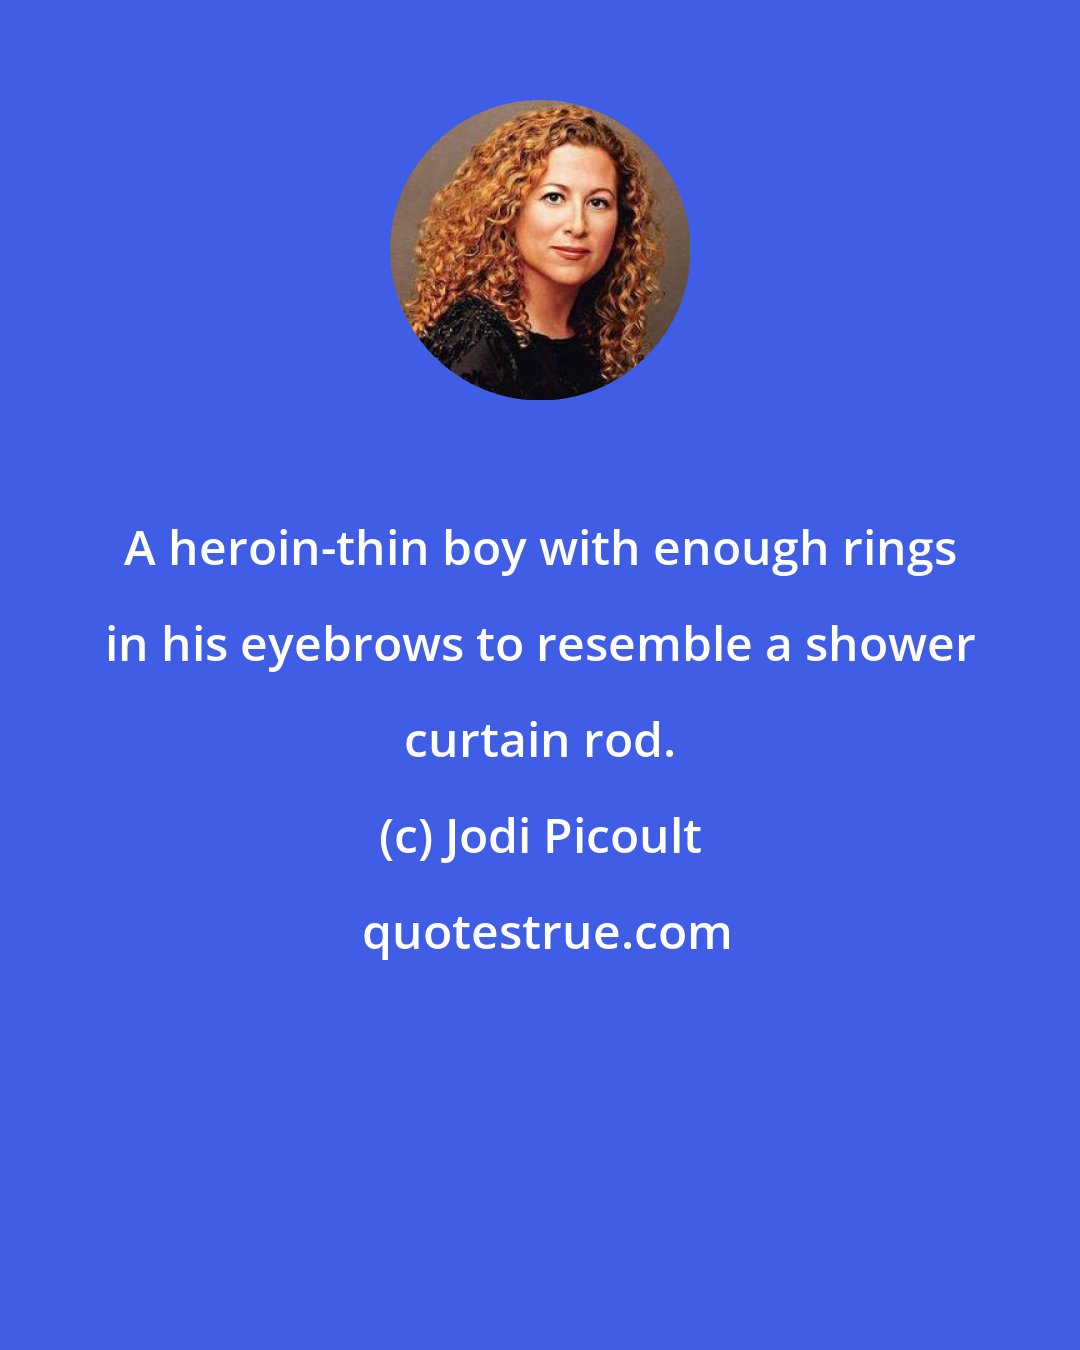 Jodi Picoult: A heroin-thin boy with enough rings in his eyebrows to resemble a shower curtain rod.